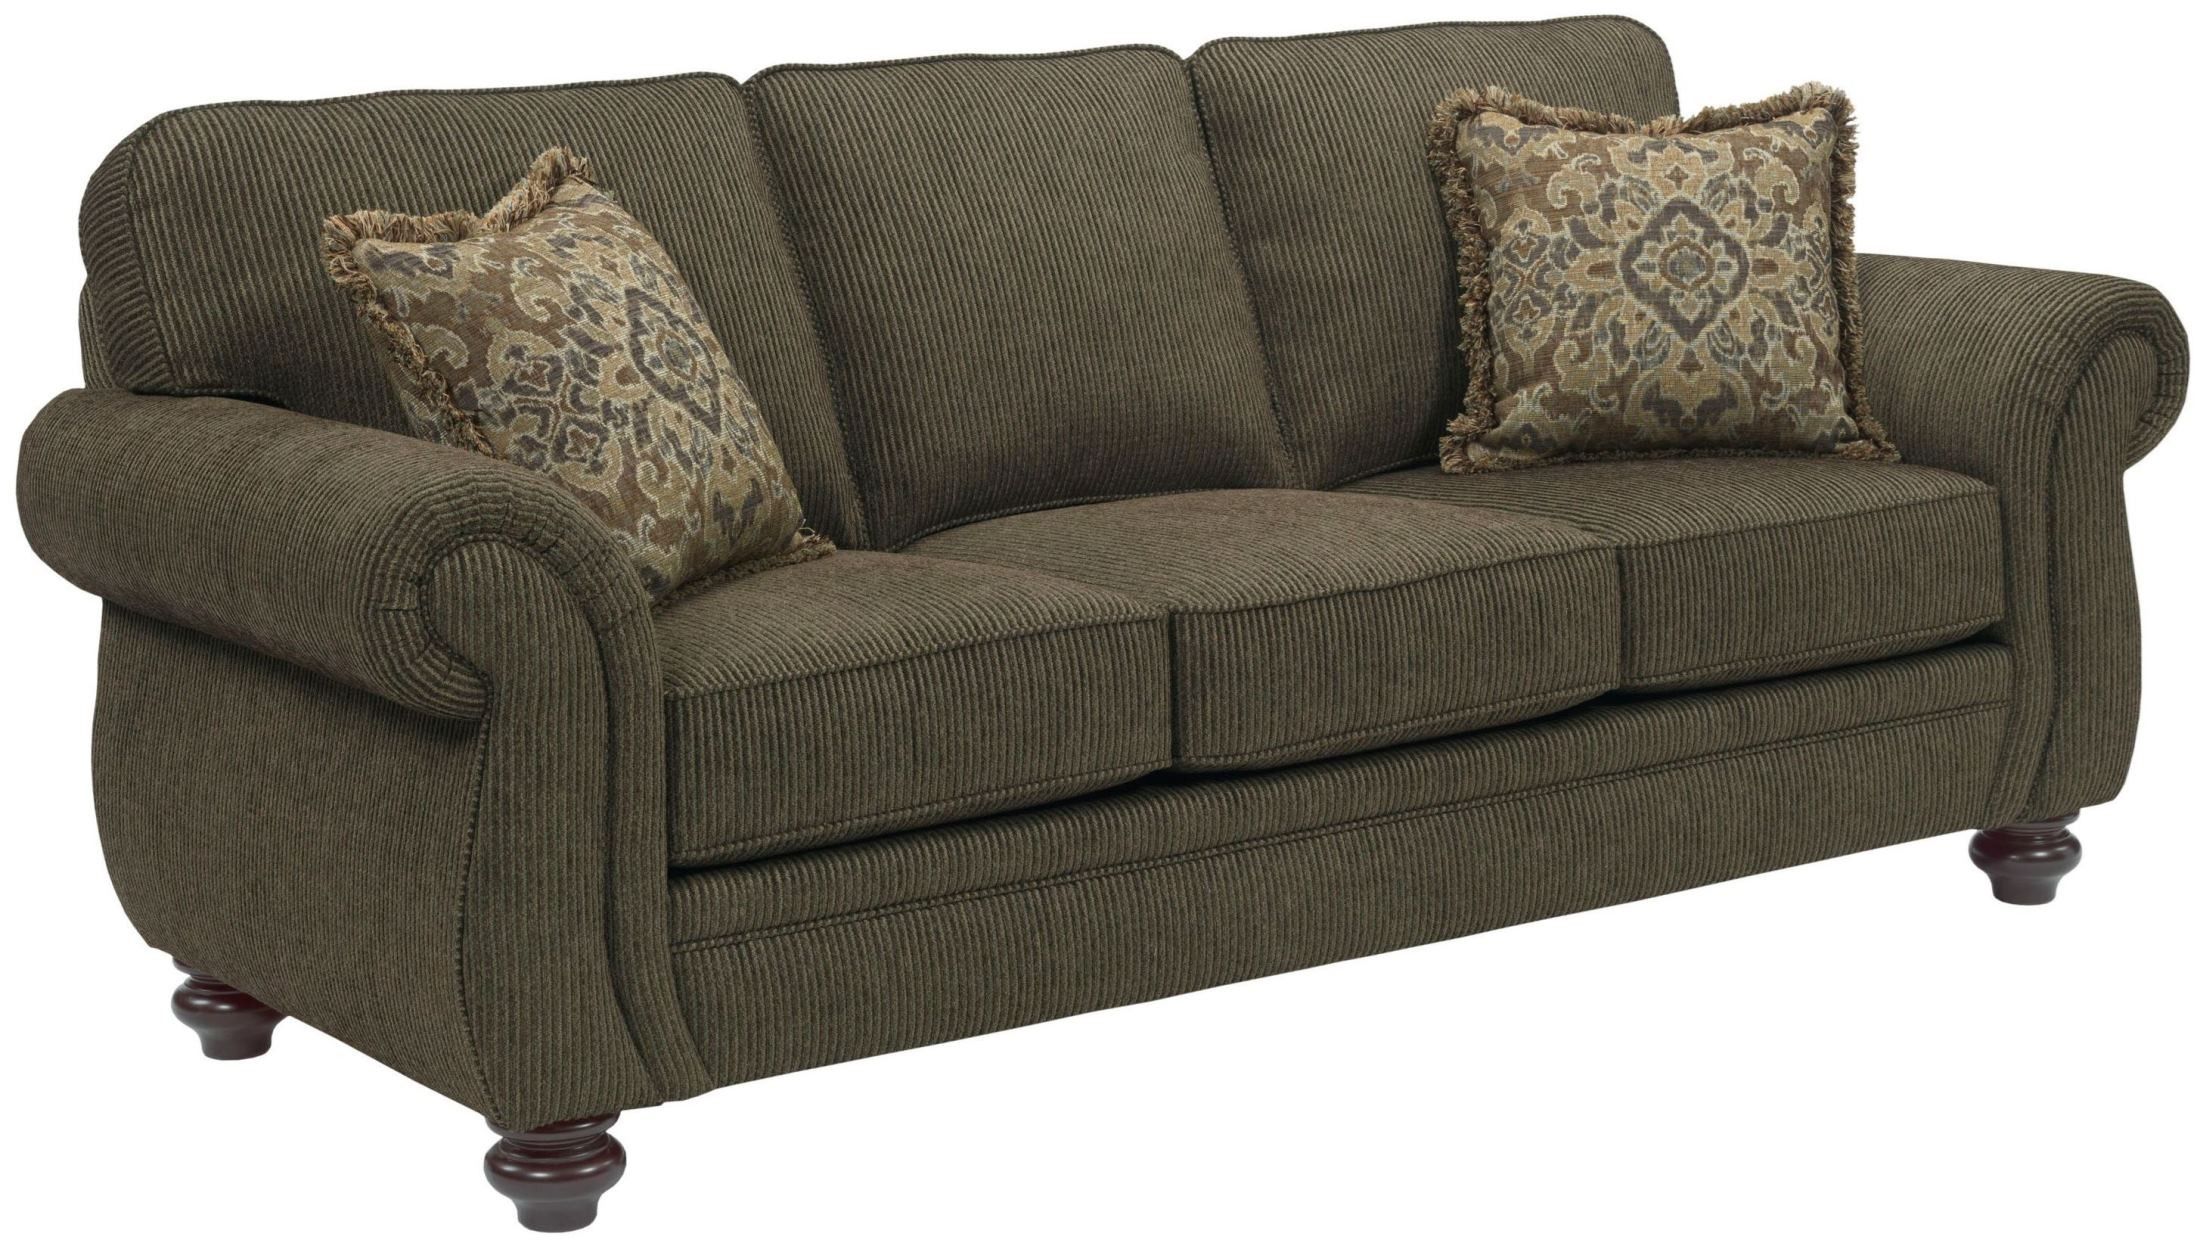 Cassandra Affinity Chenille Fabric Sofa From Broyhill (3688 3q 8997 28 With Regard To Chenille Sectional Sofas (View 17 of 20)